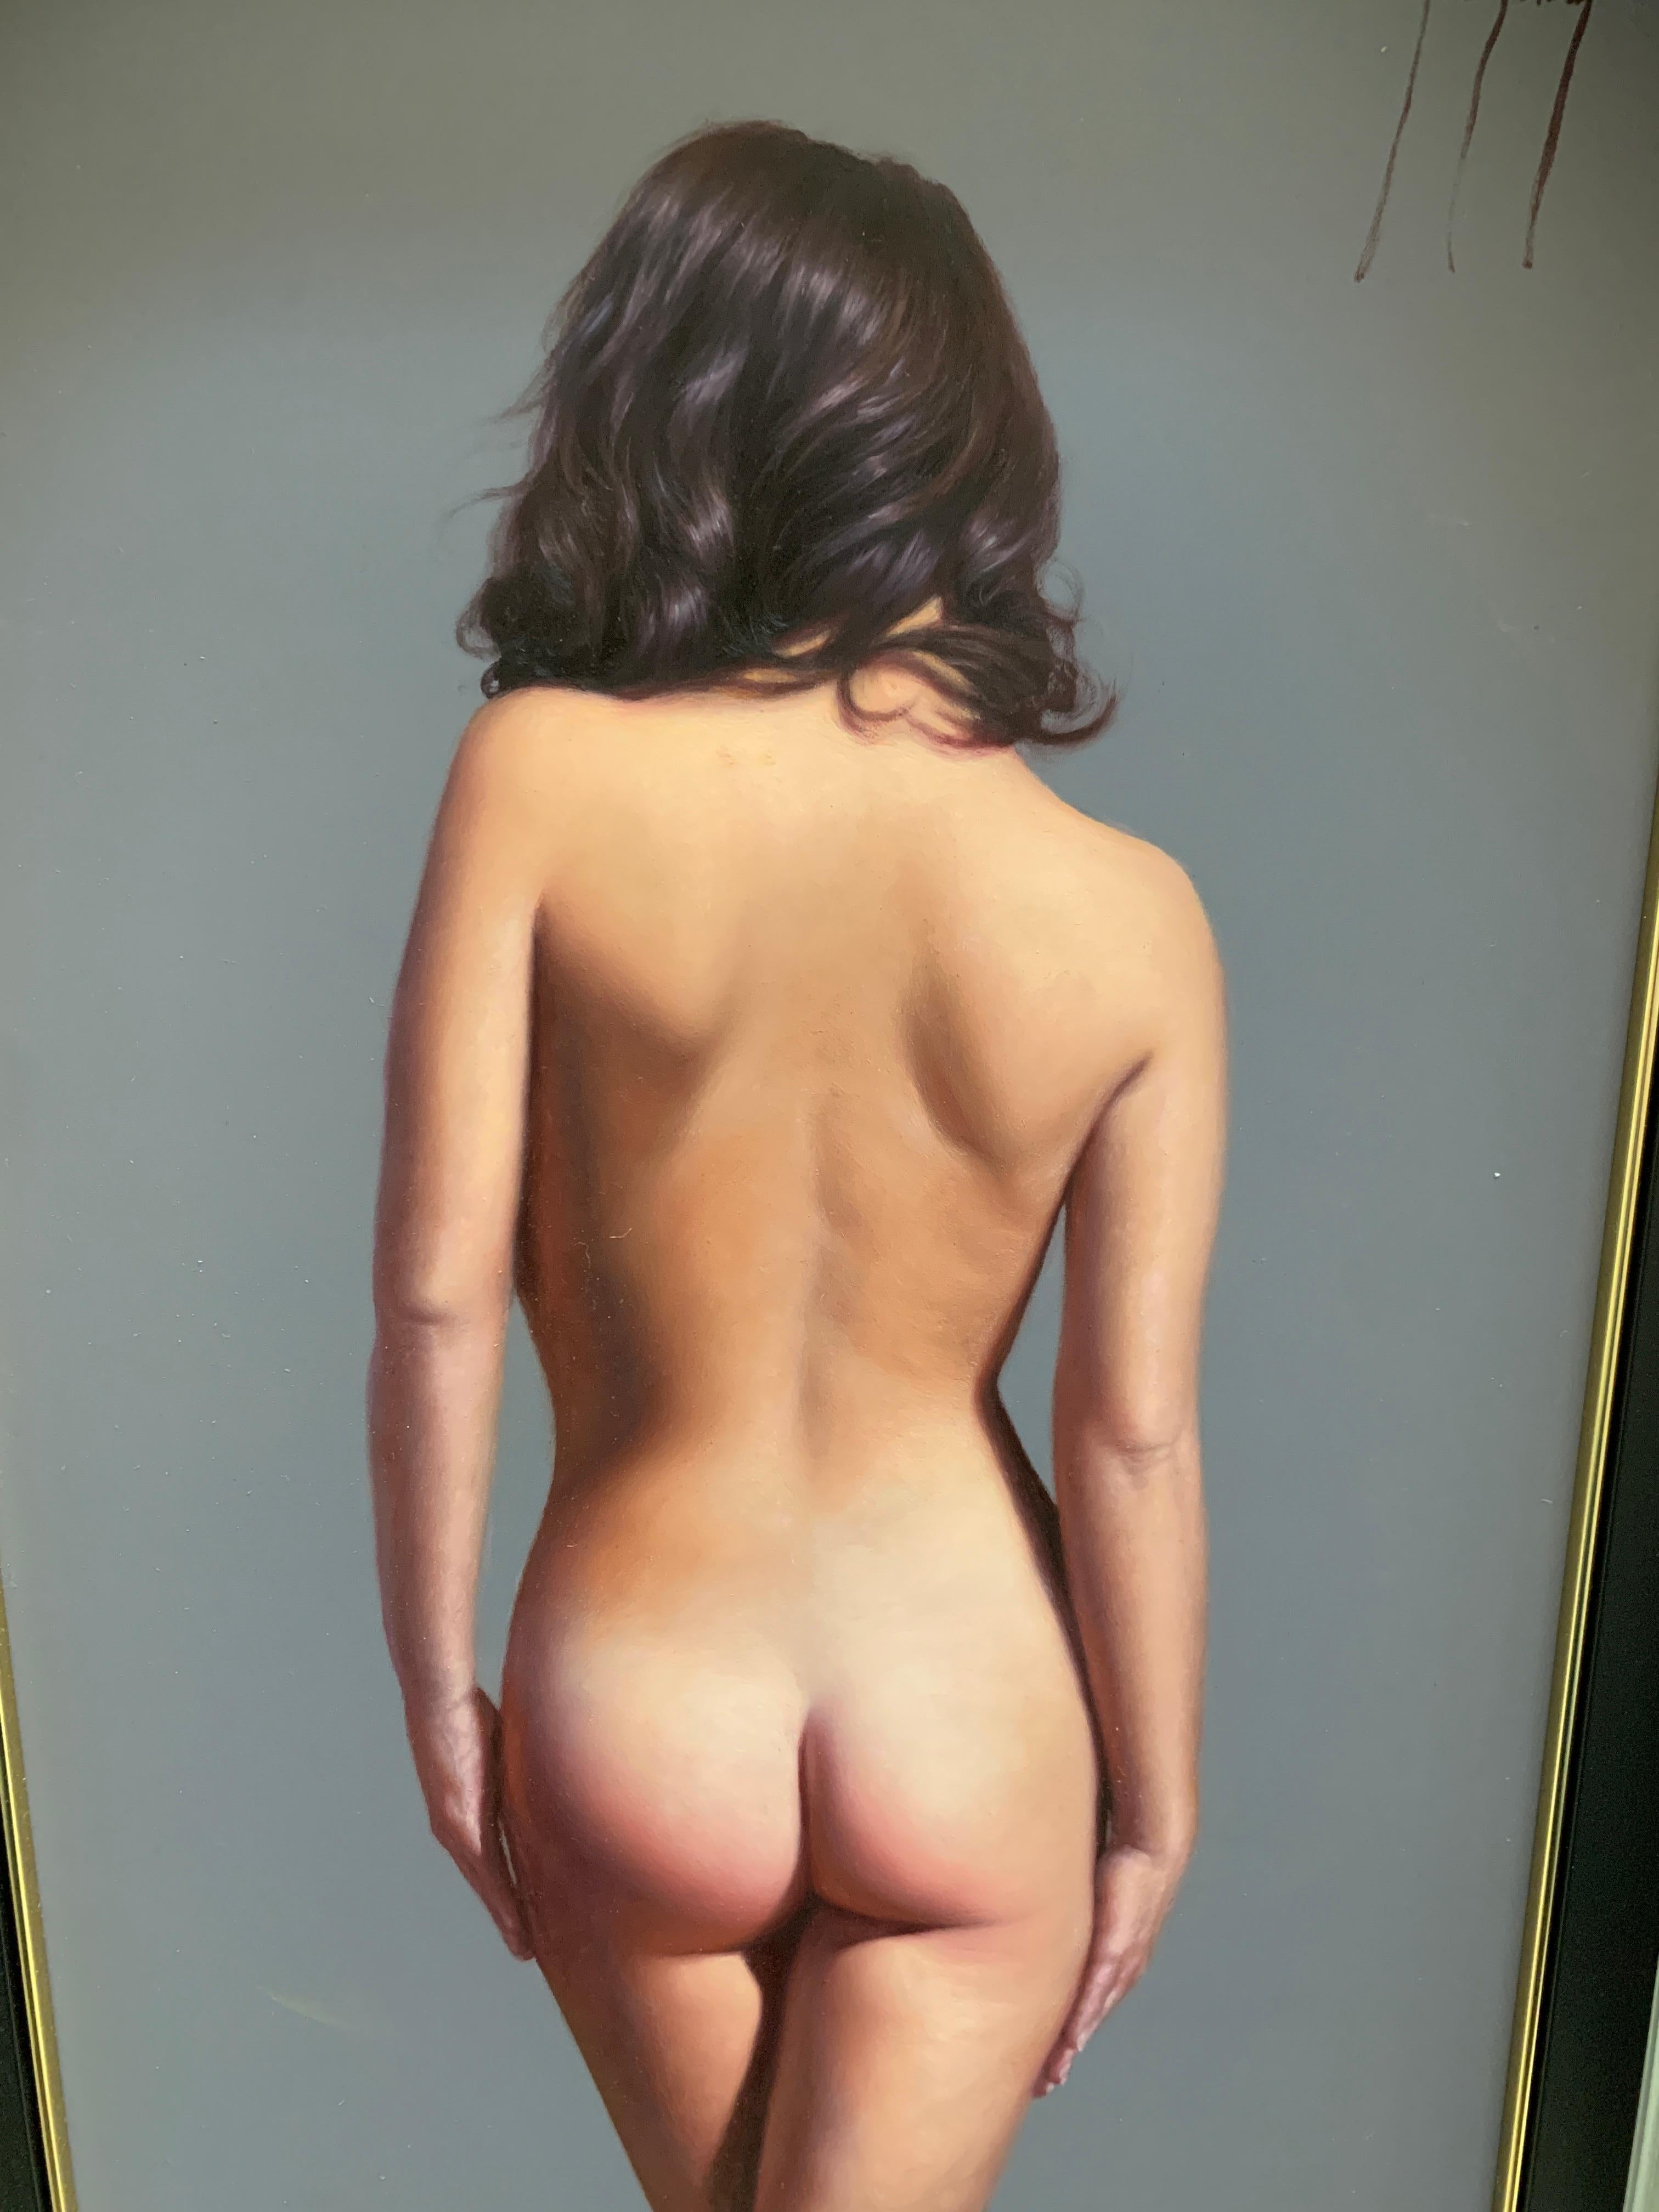 Equilibrio (Balance) - Brown Nude Painting by Jose Borrell